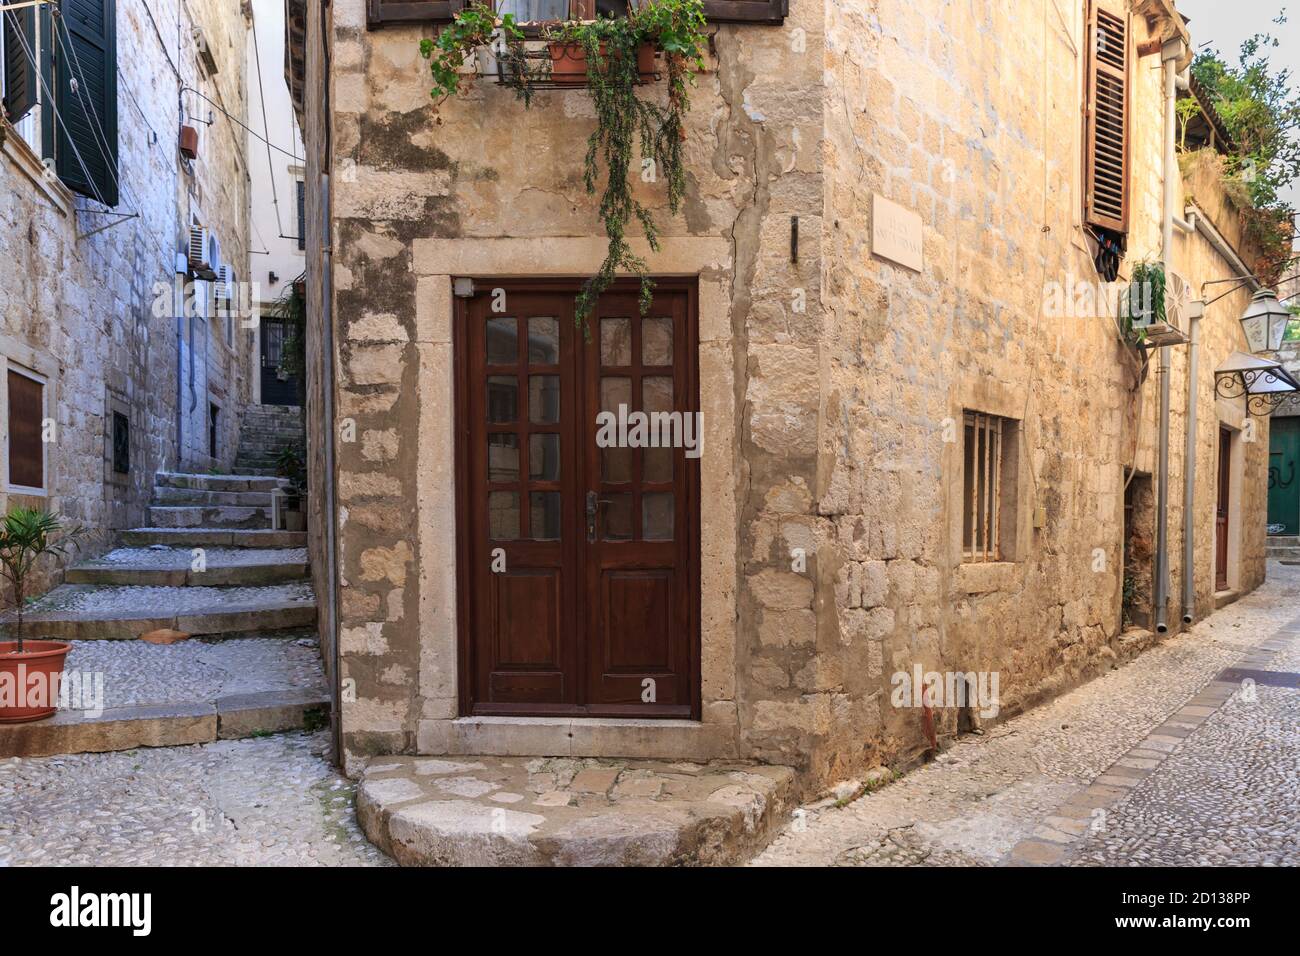 Cobble stone street corner with historic stone buildings in the Old Town, Dubrovnik, Croatia Stock Photo